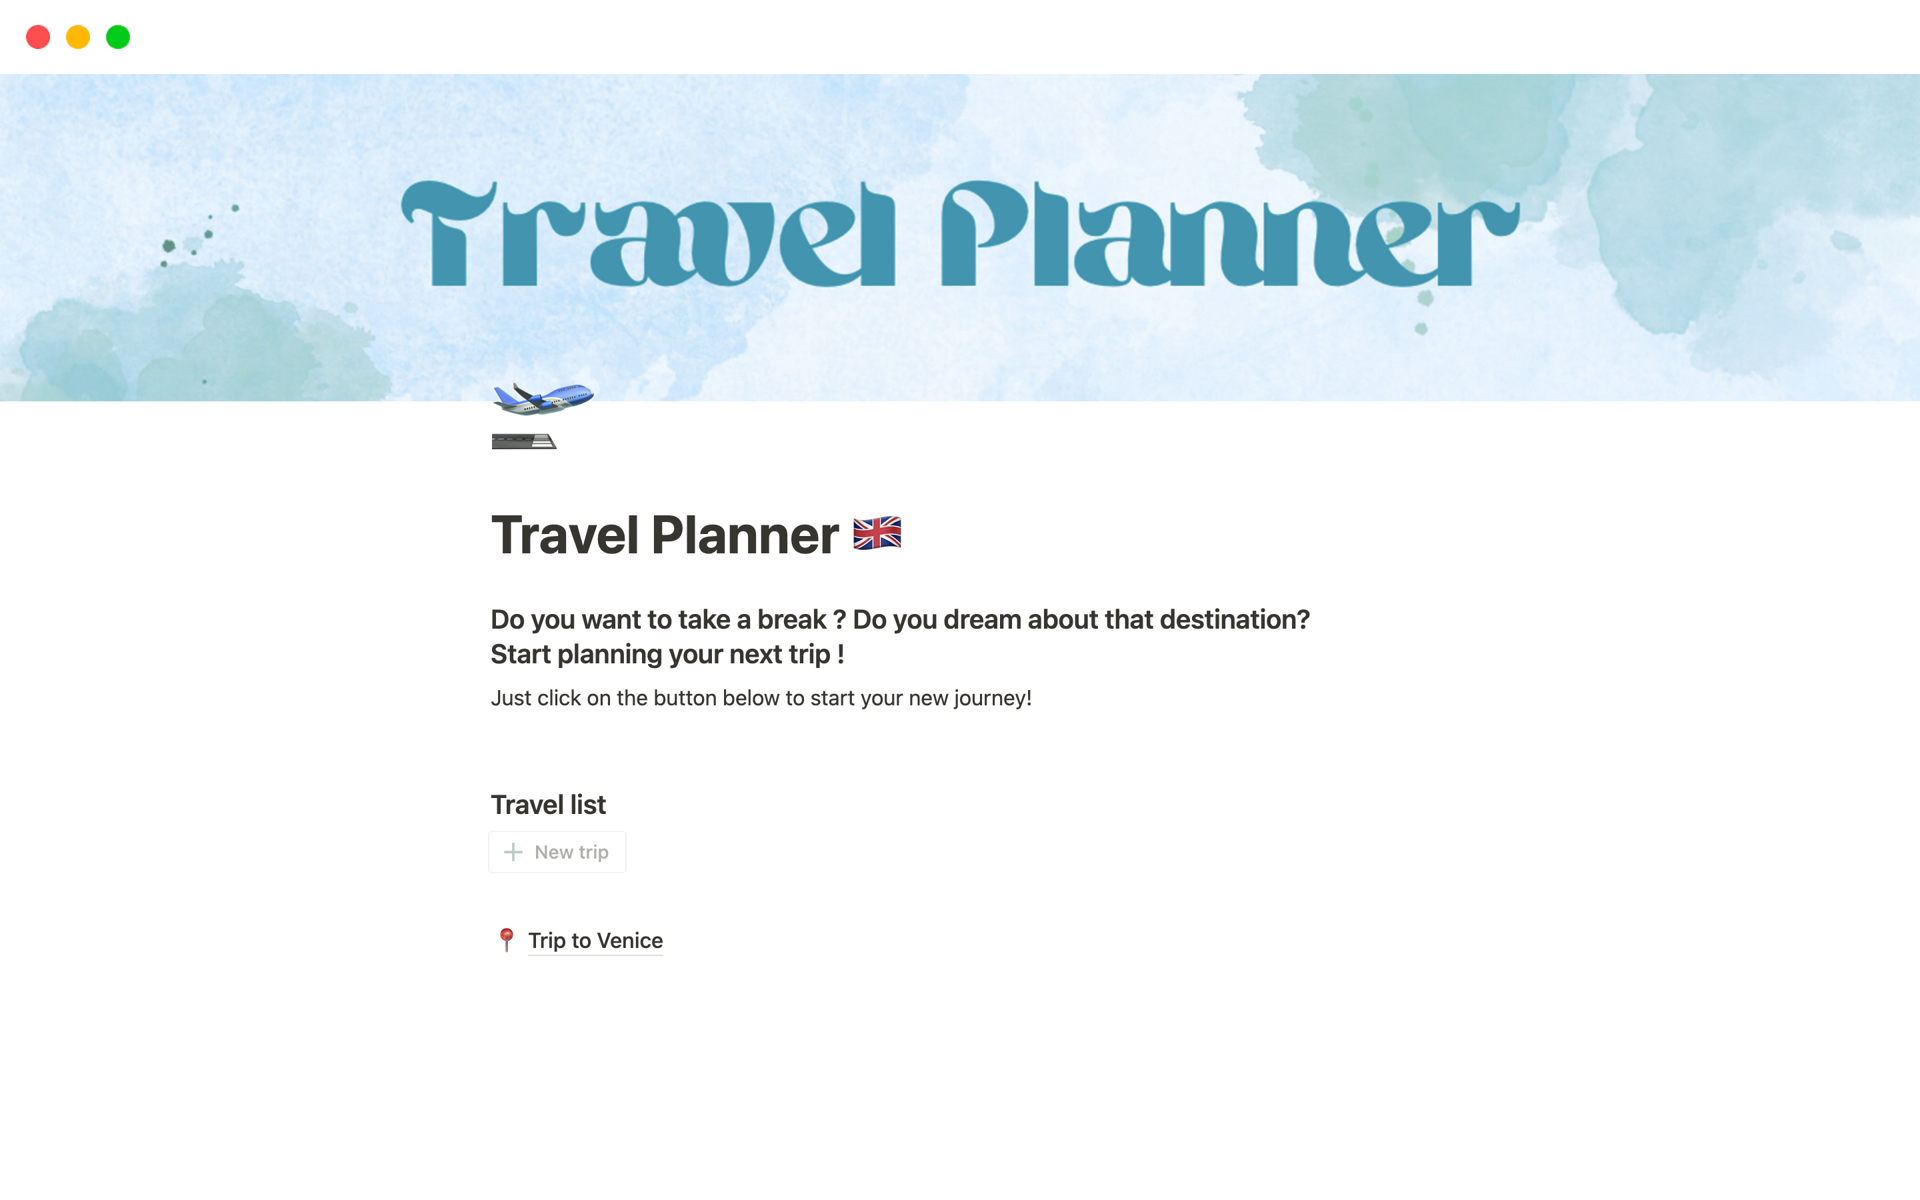 It helps you organize your next trip and it allows you to have all your trips in one page